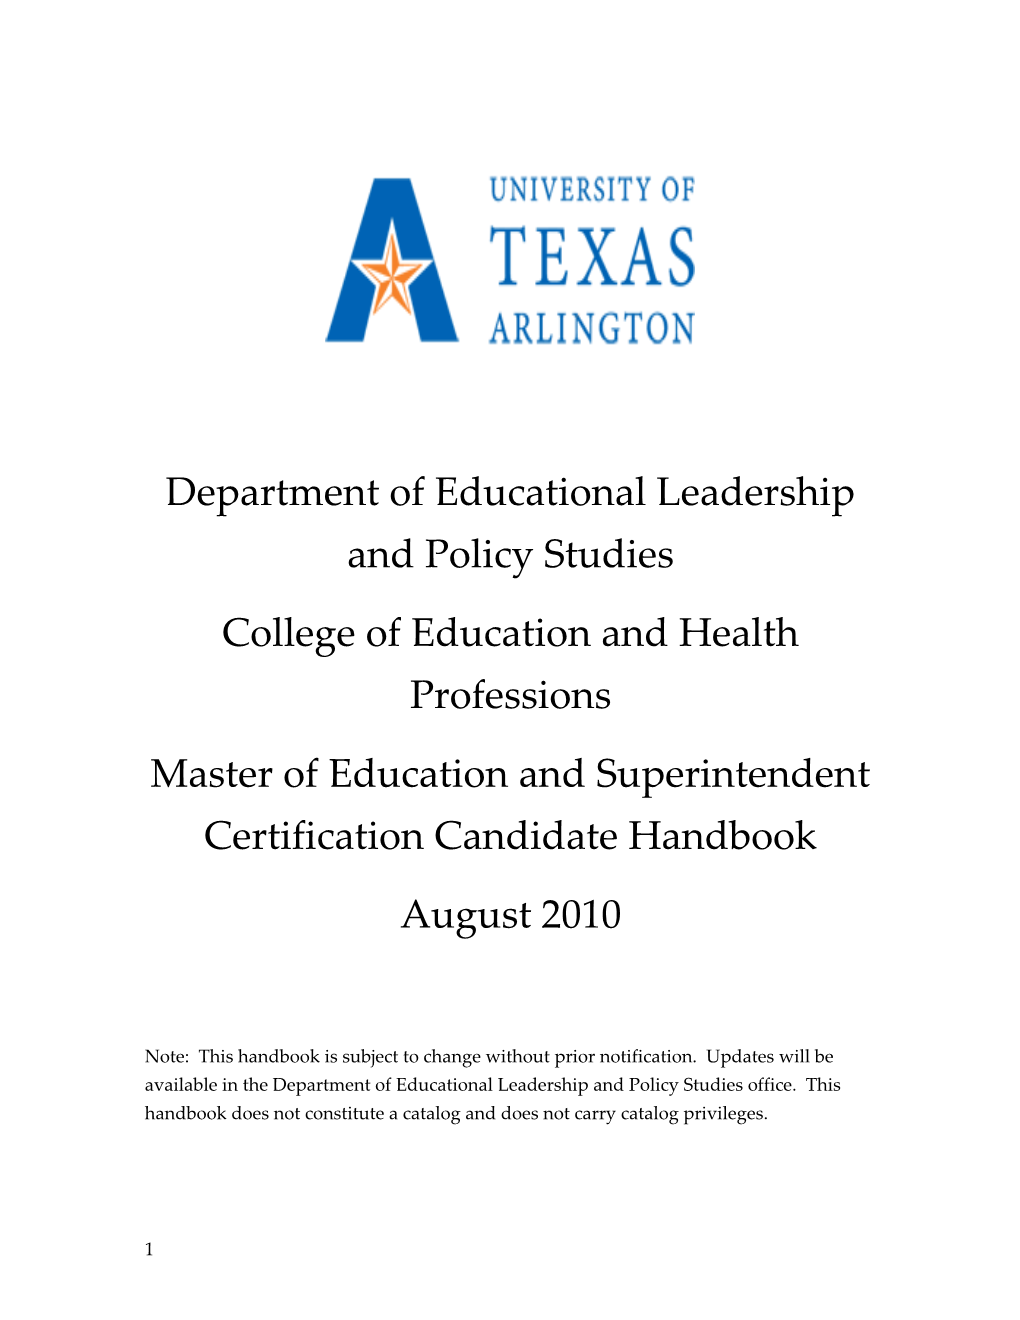 Department of Educational Leadership and Policy Studies